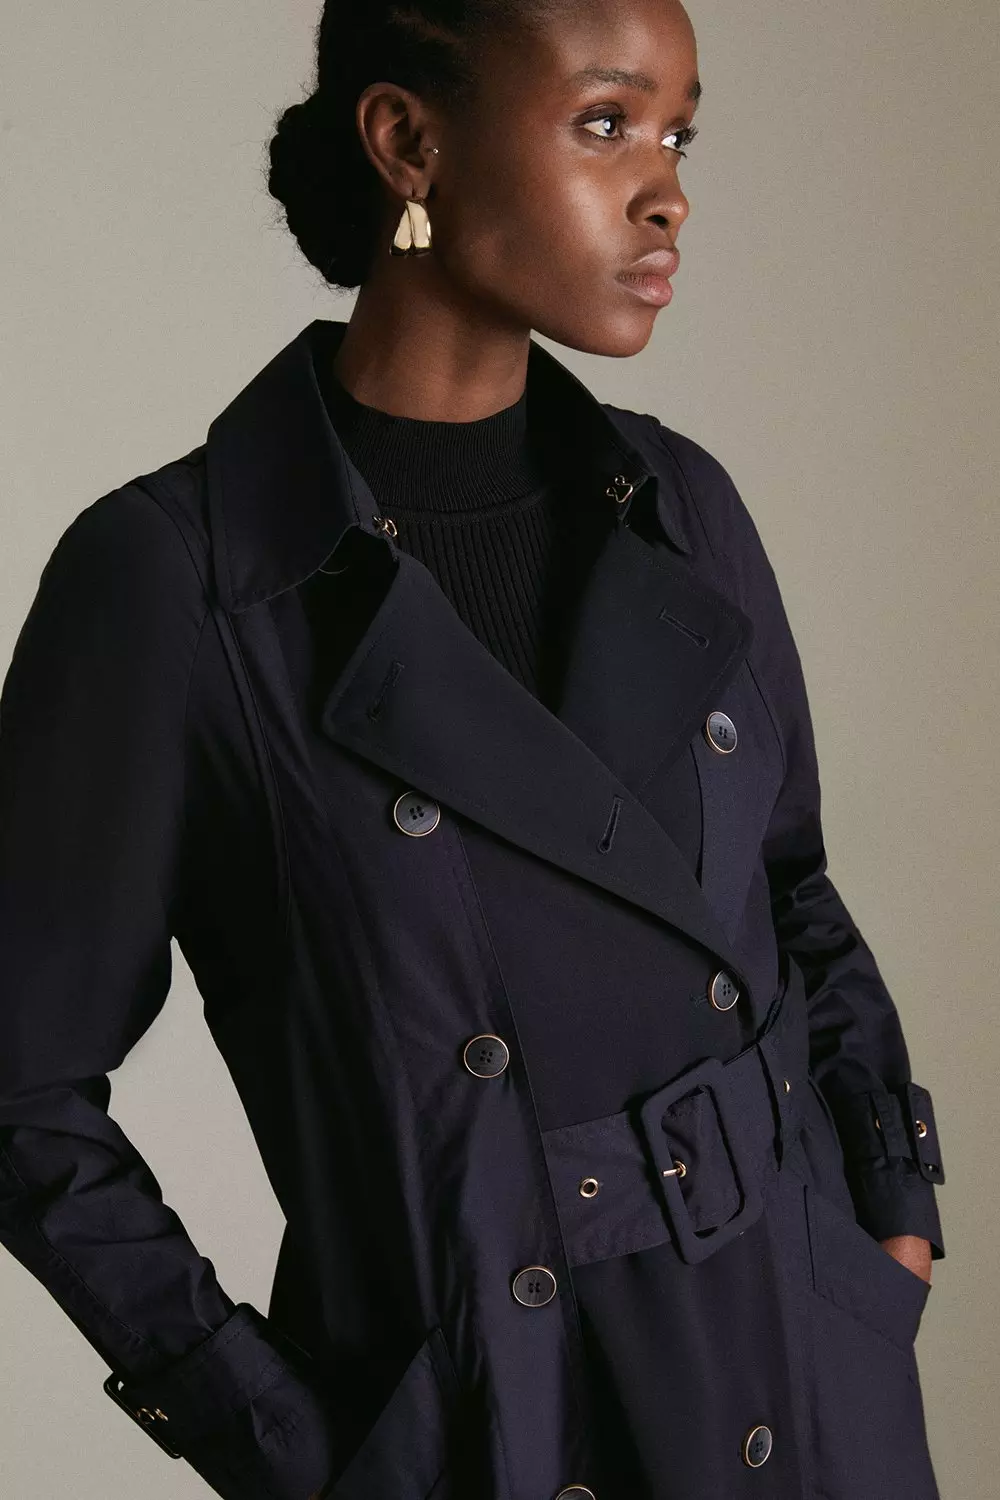 Jacob Trench coat with pleated back - Coats